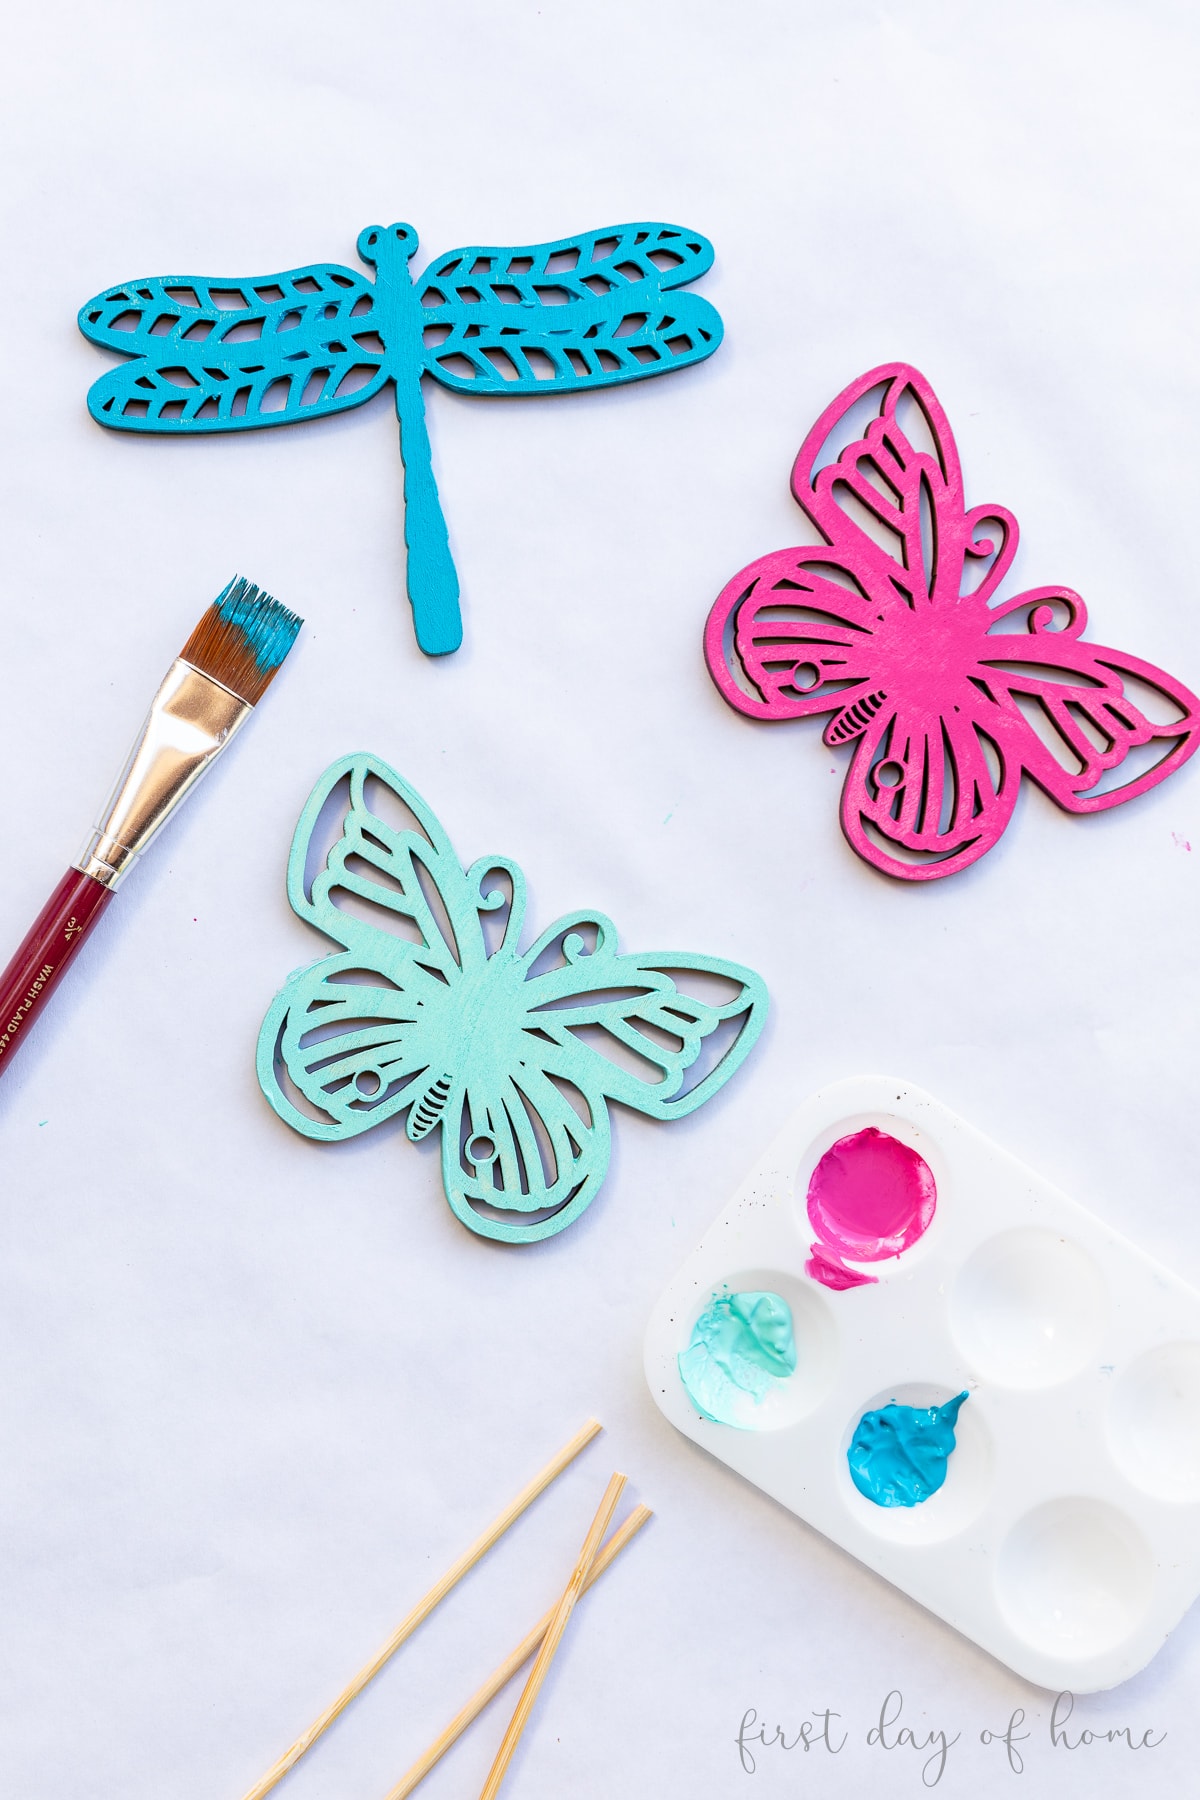 Wooden garden stakes in shapes of butterflies and dragonfly, shown with acrylic paints and paintbrush